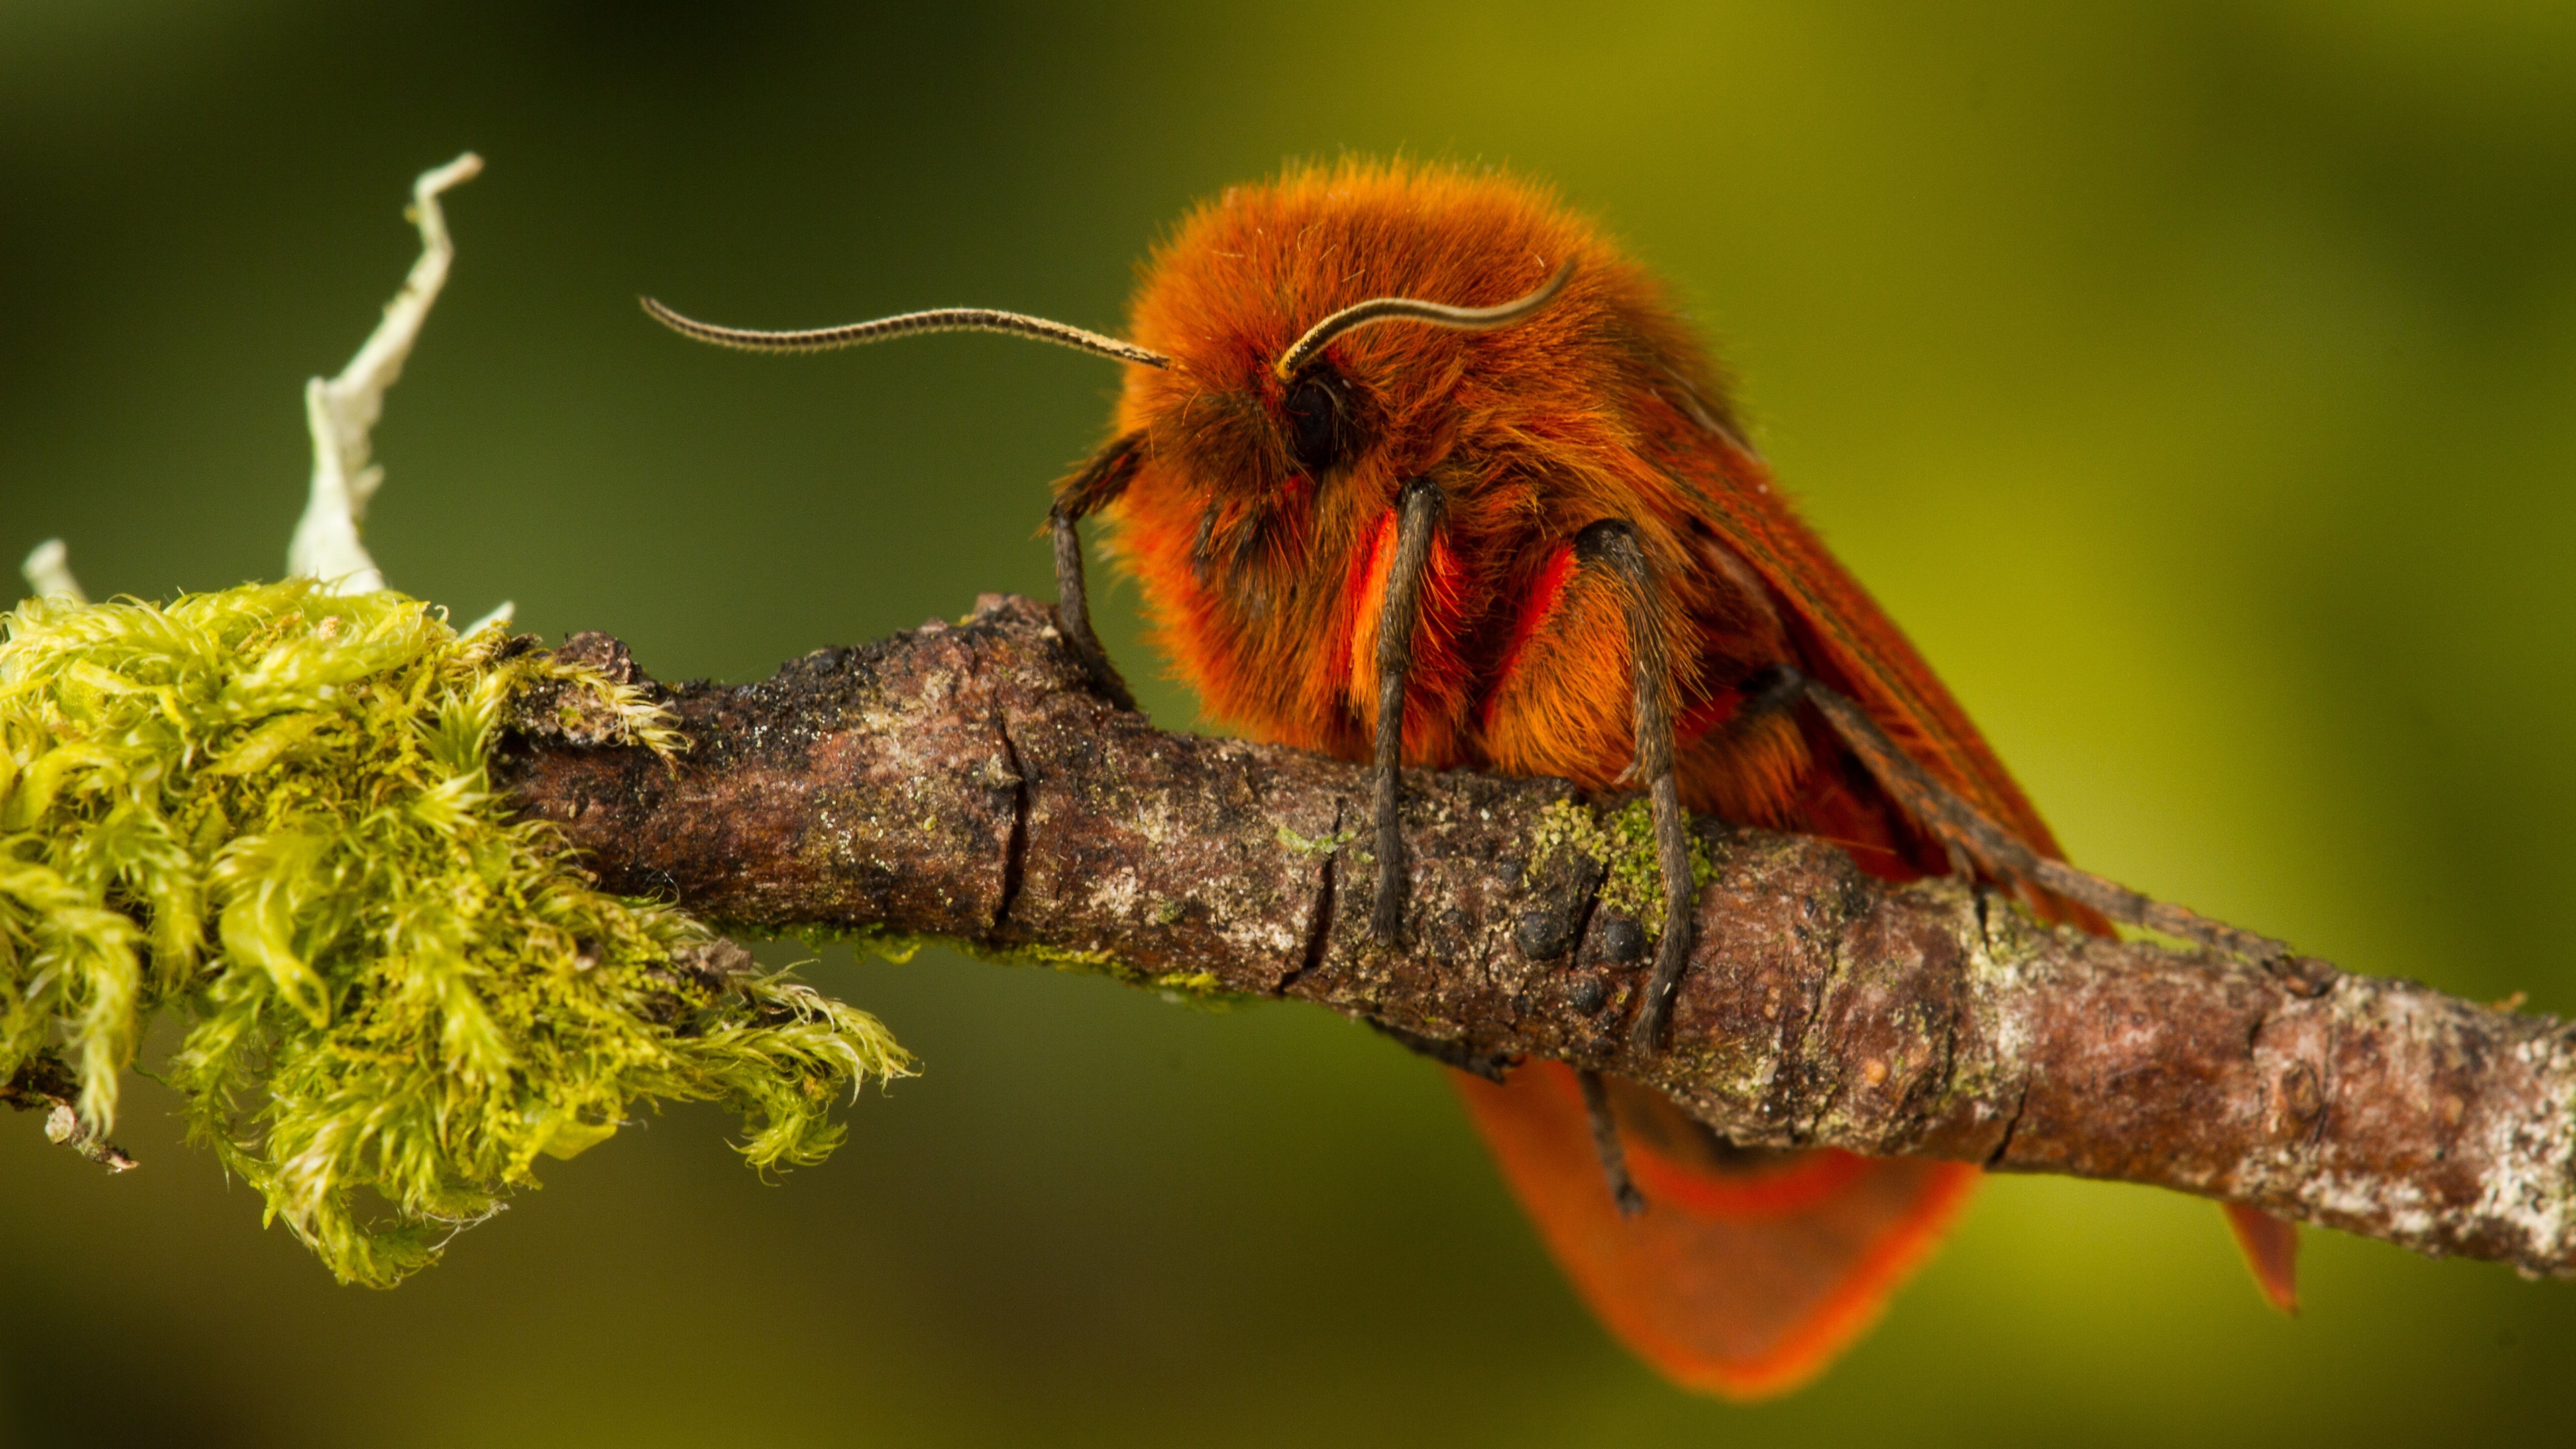 Breath-taking moth wallpapers, High-resolution images, Ideal backgrounds, Stunning visual impact, 3840x2160 4K Desktop